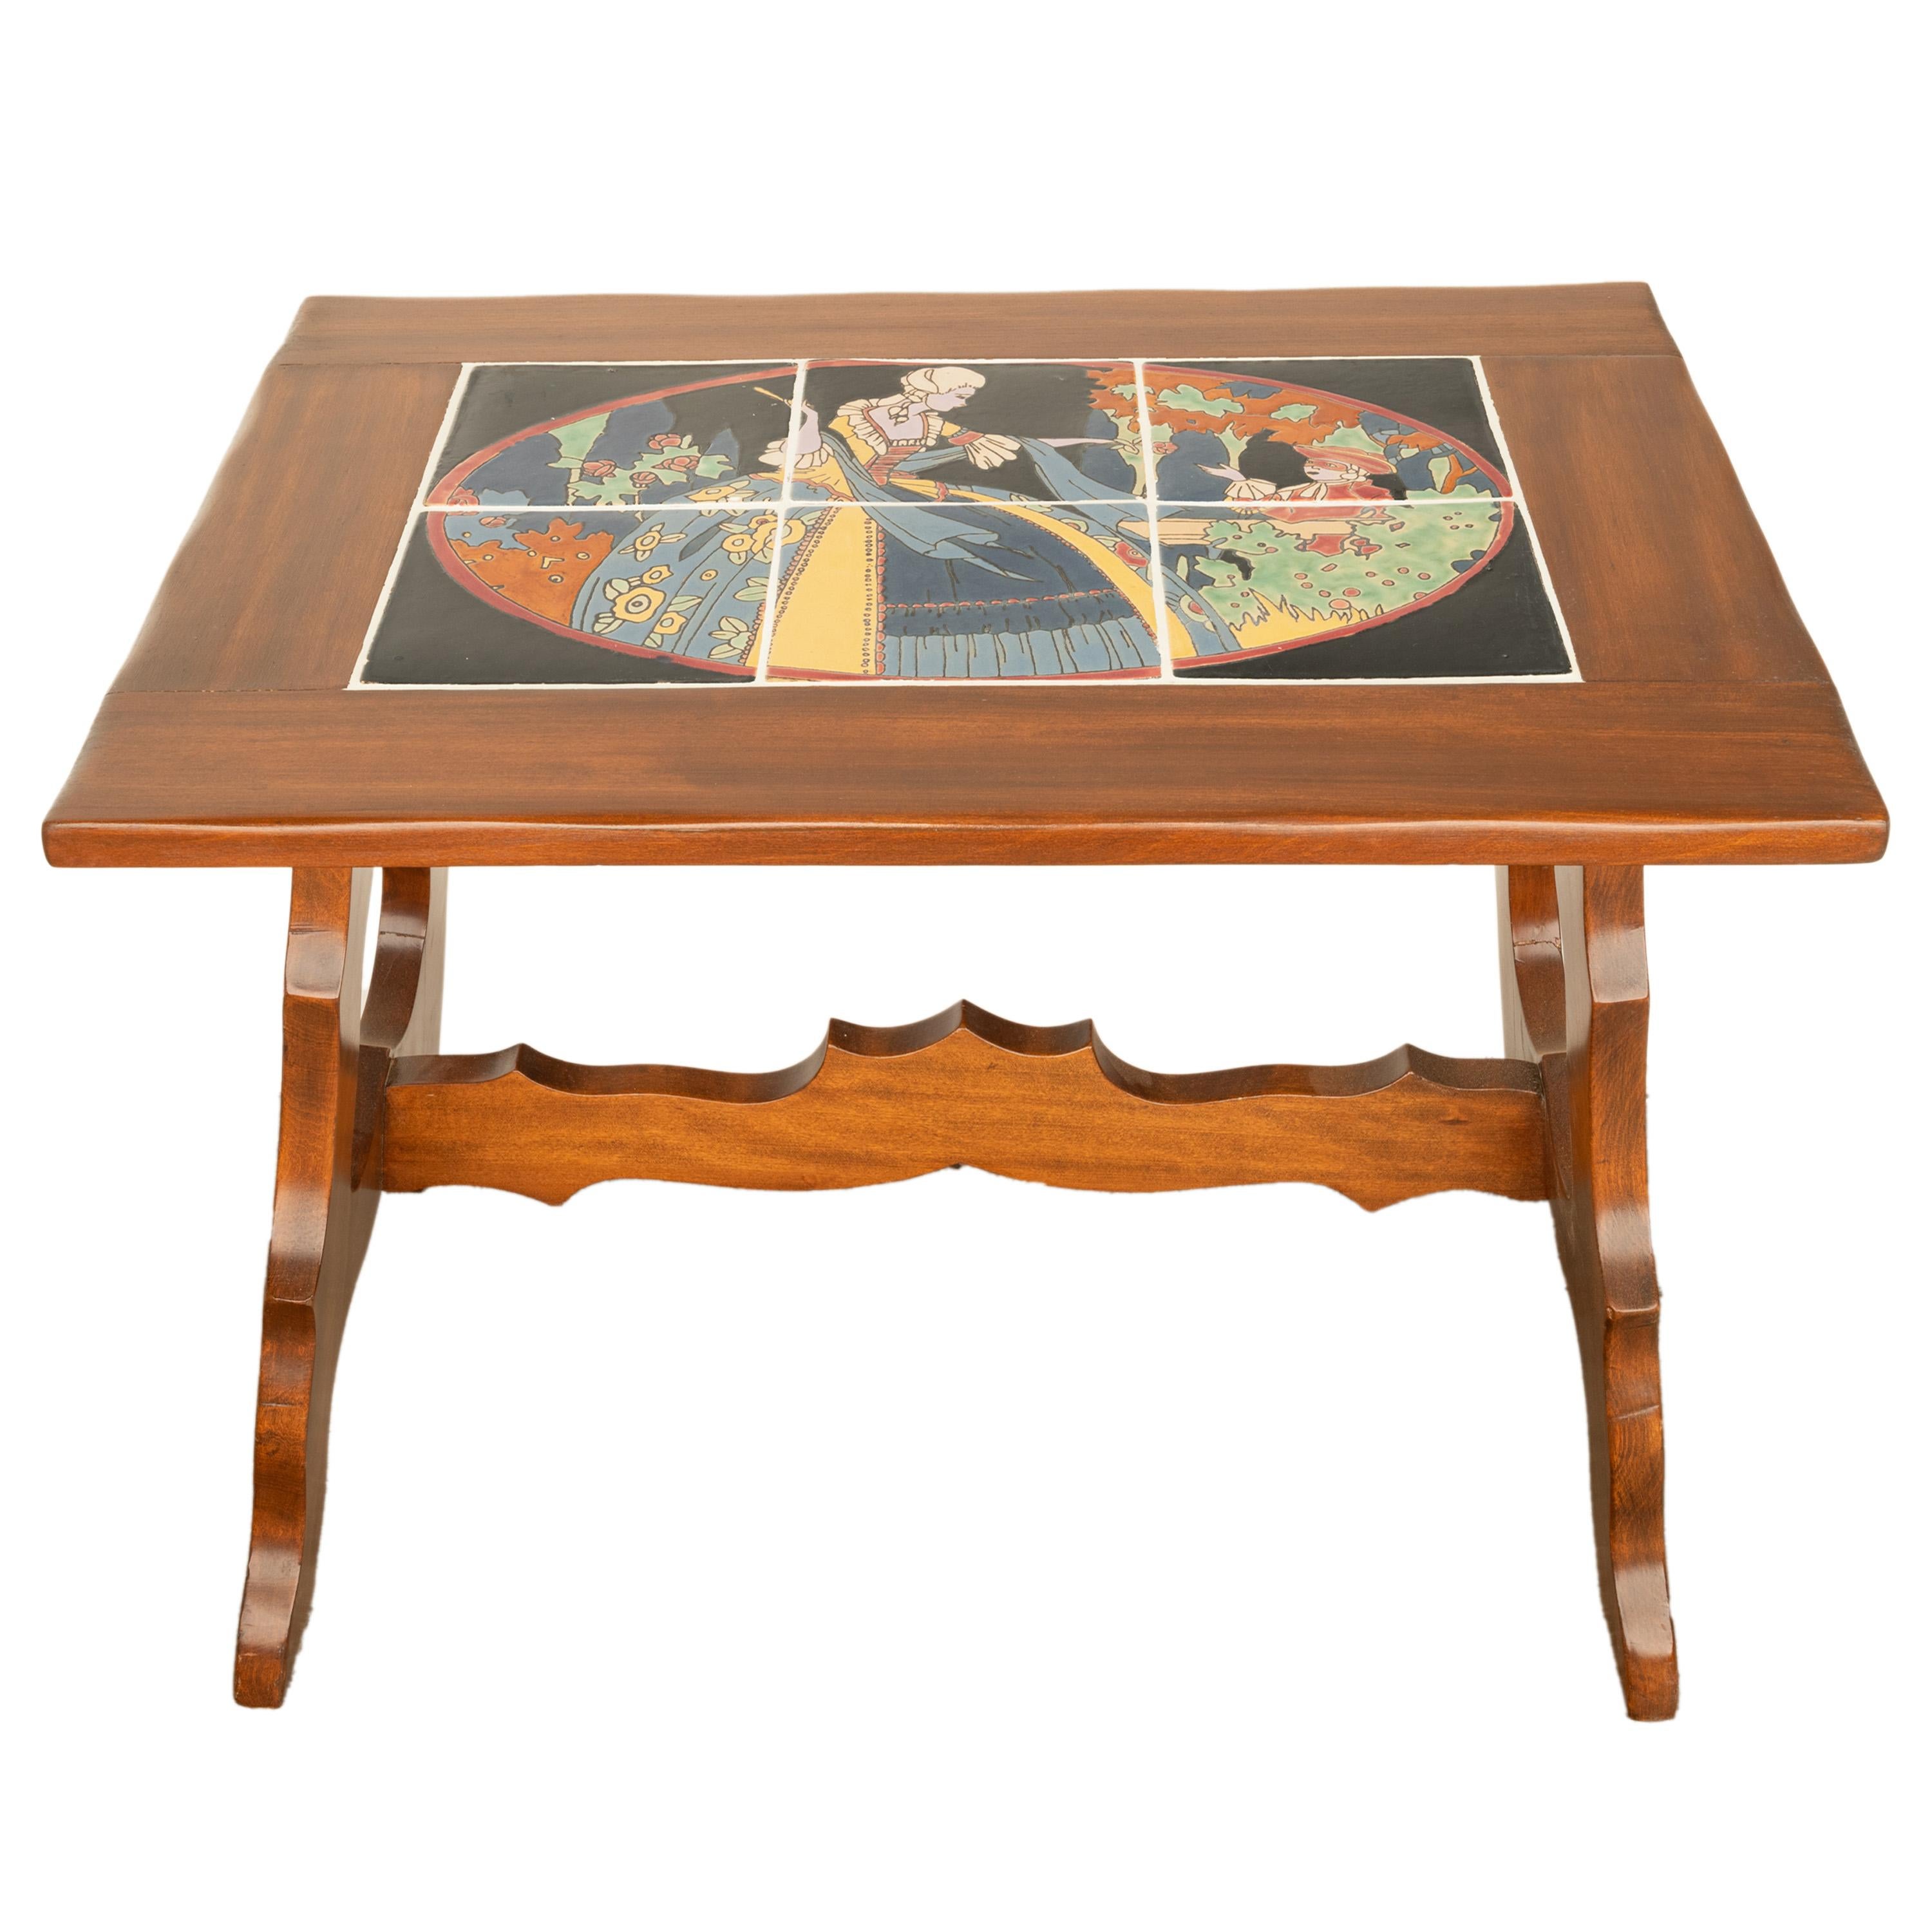 Mid-20th Century Antique Mission Catalina Monterrey California Tile Top Walnut Coffee Table 1930 For Sale